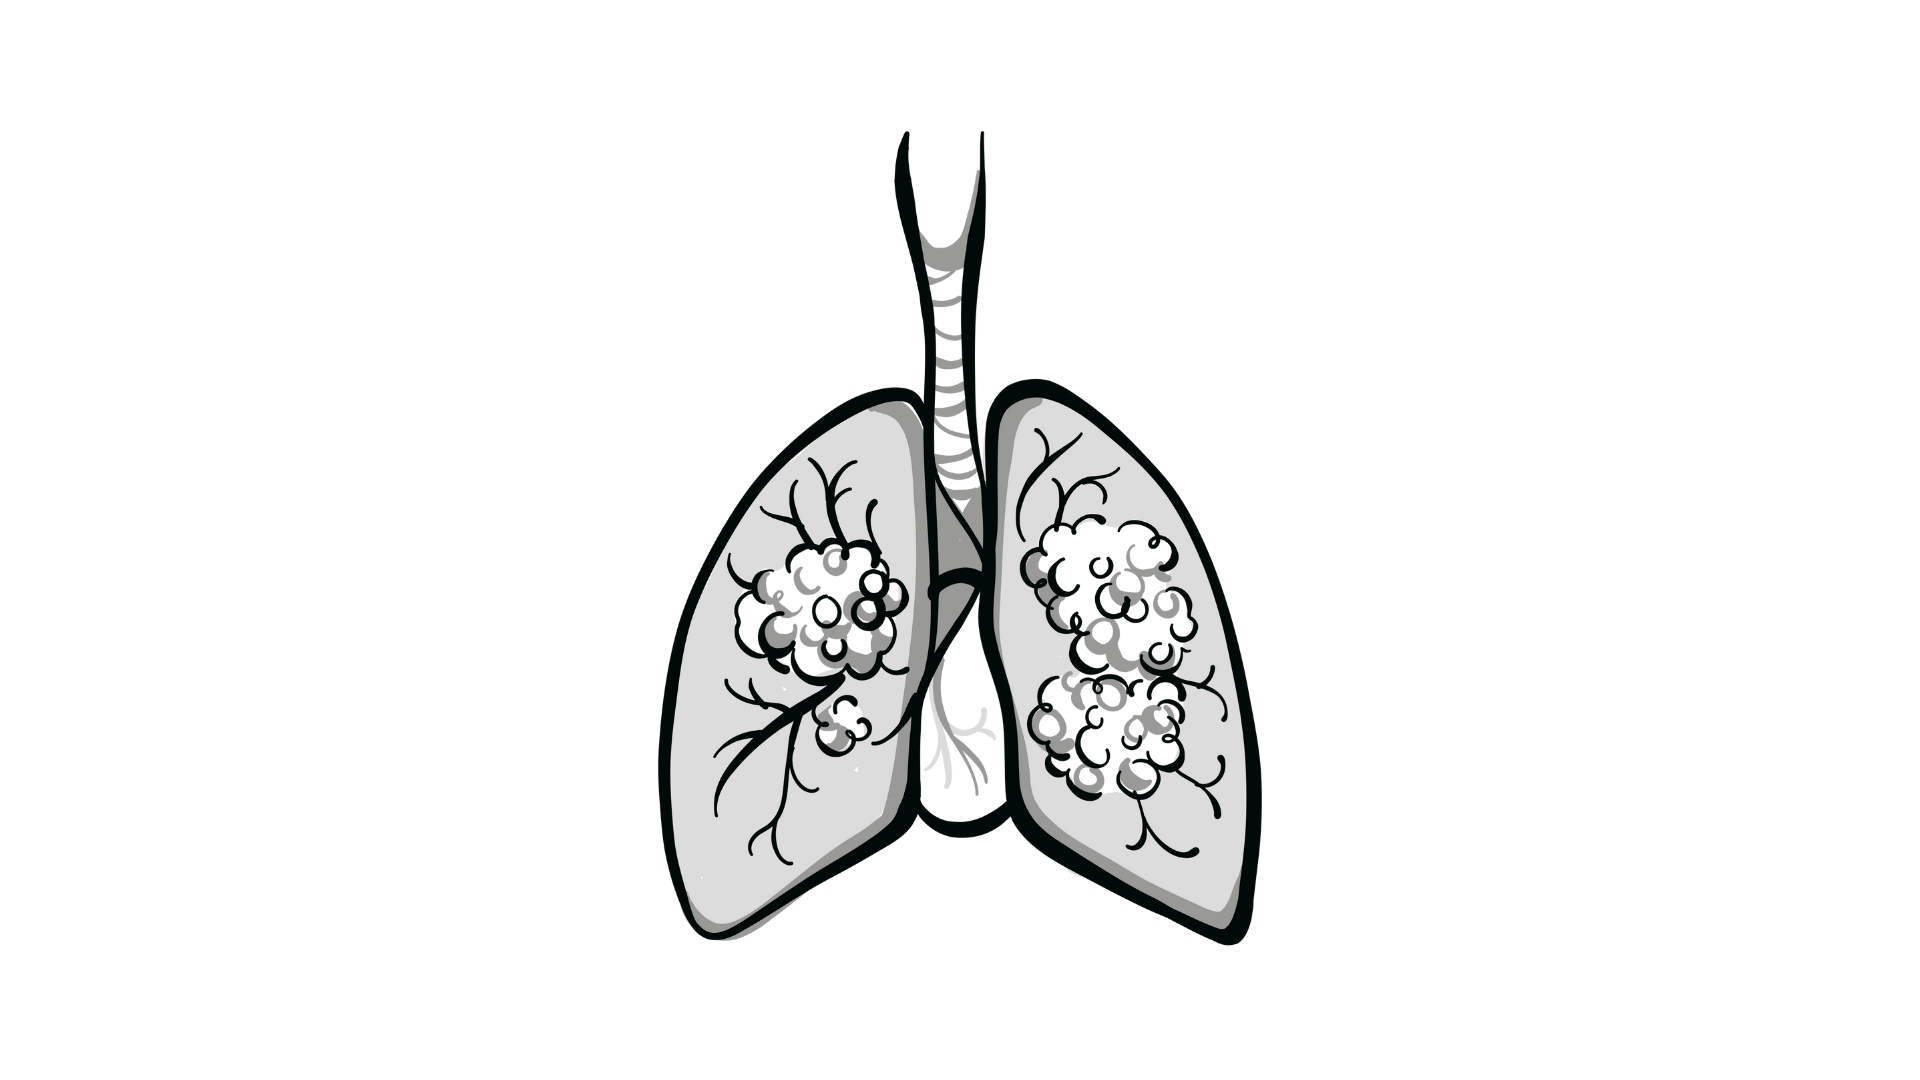 Plinabulin Reduces Duration of Severe Neutropenia in Patients With NSCLC